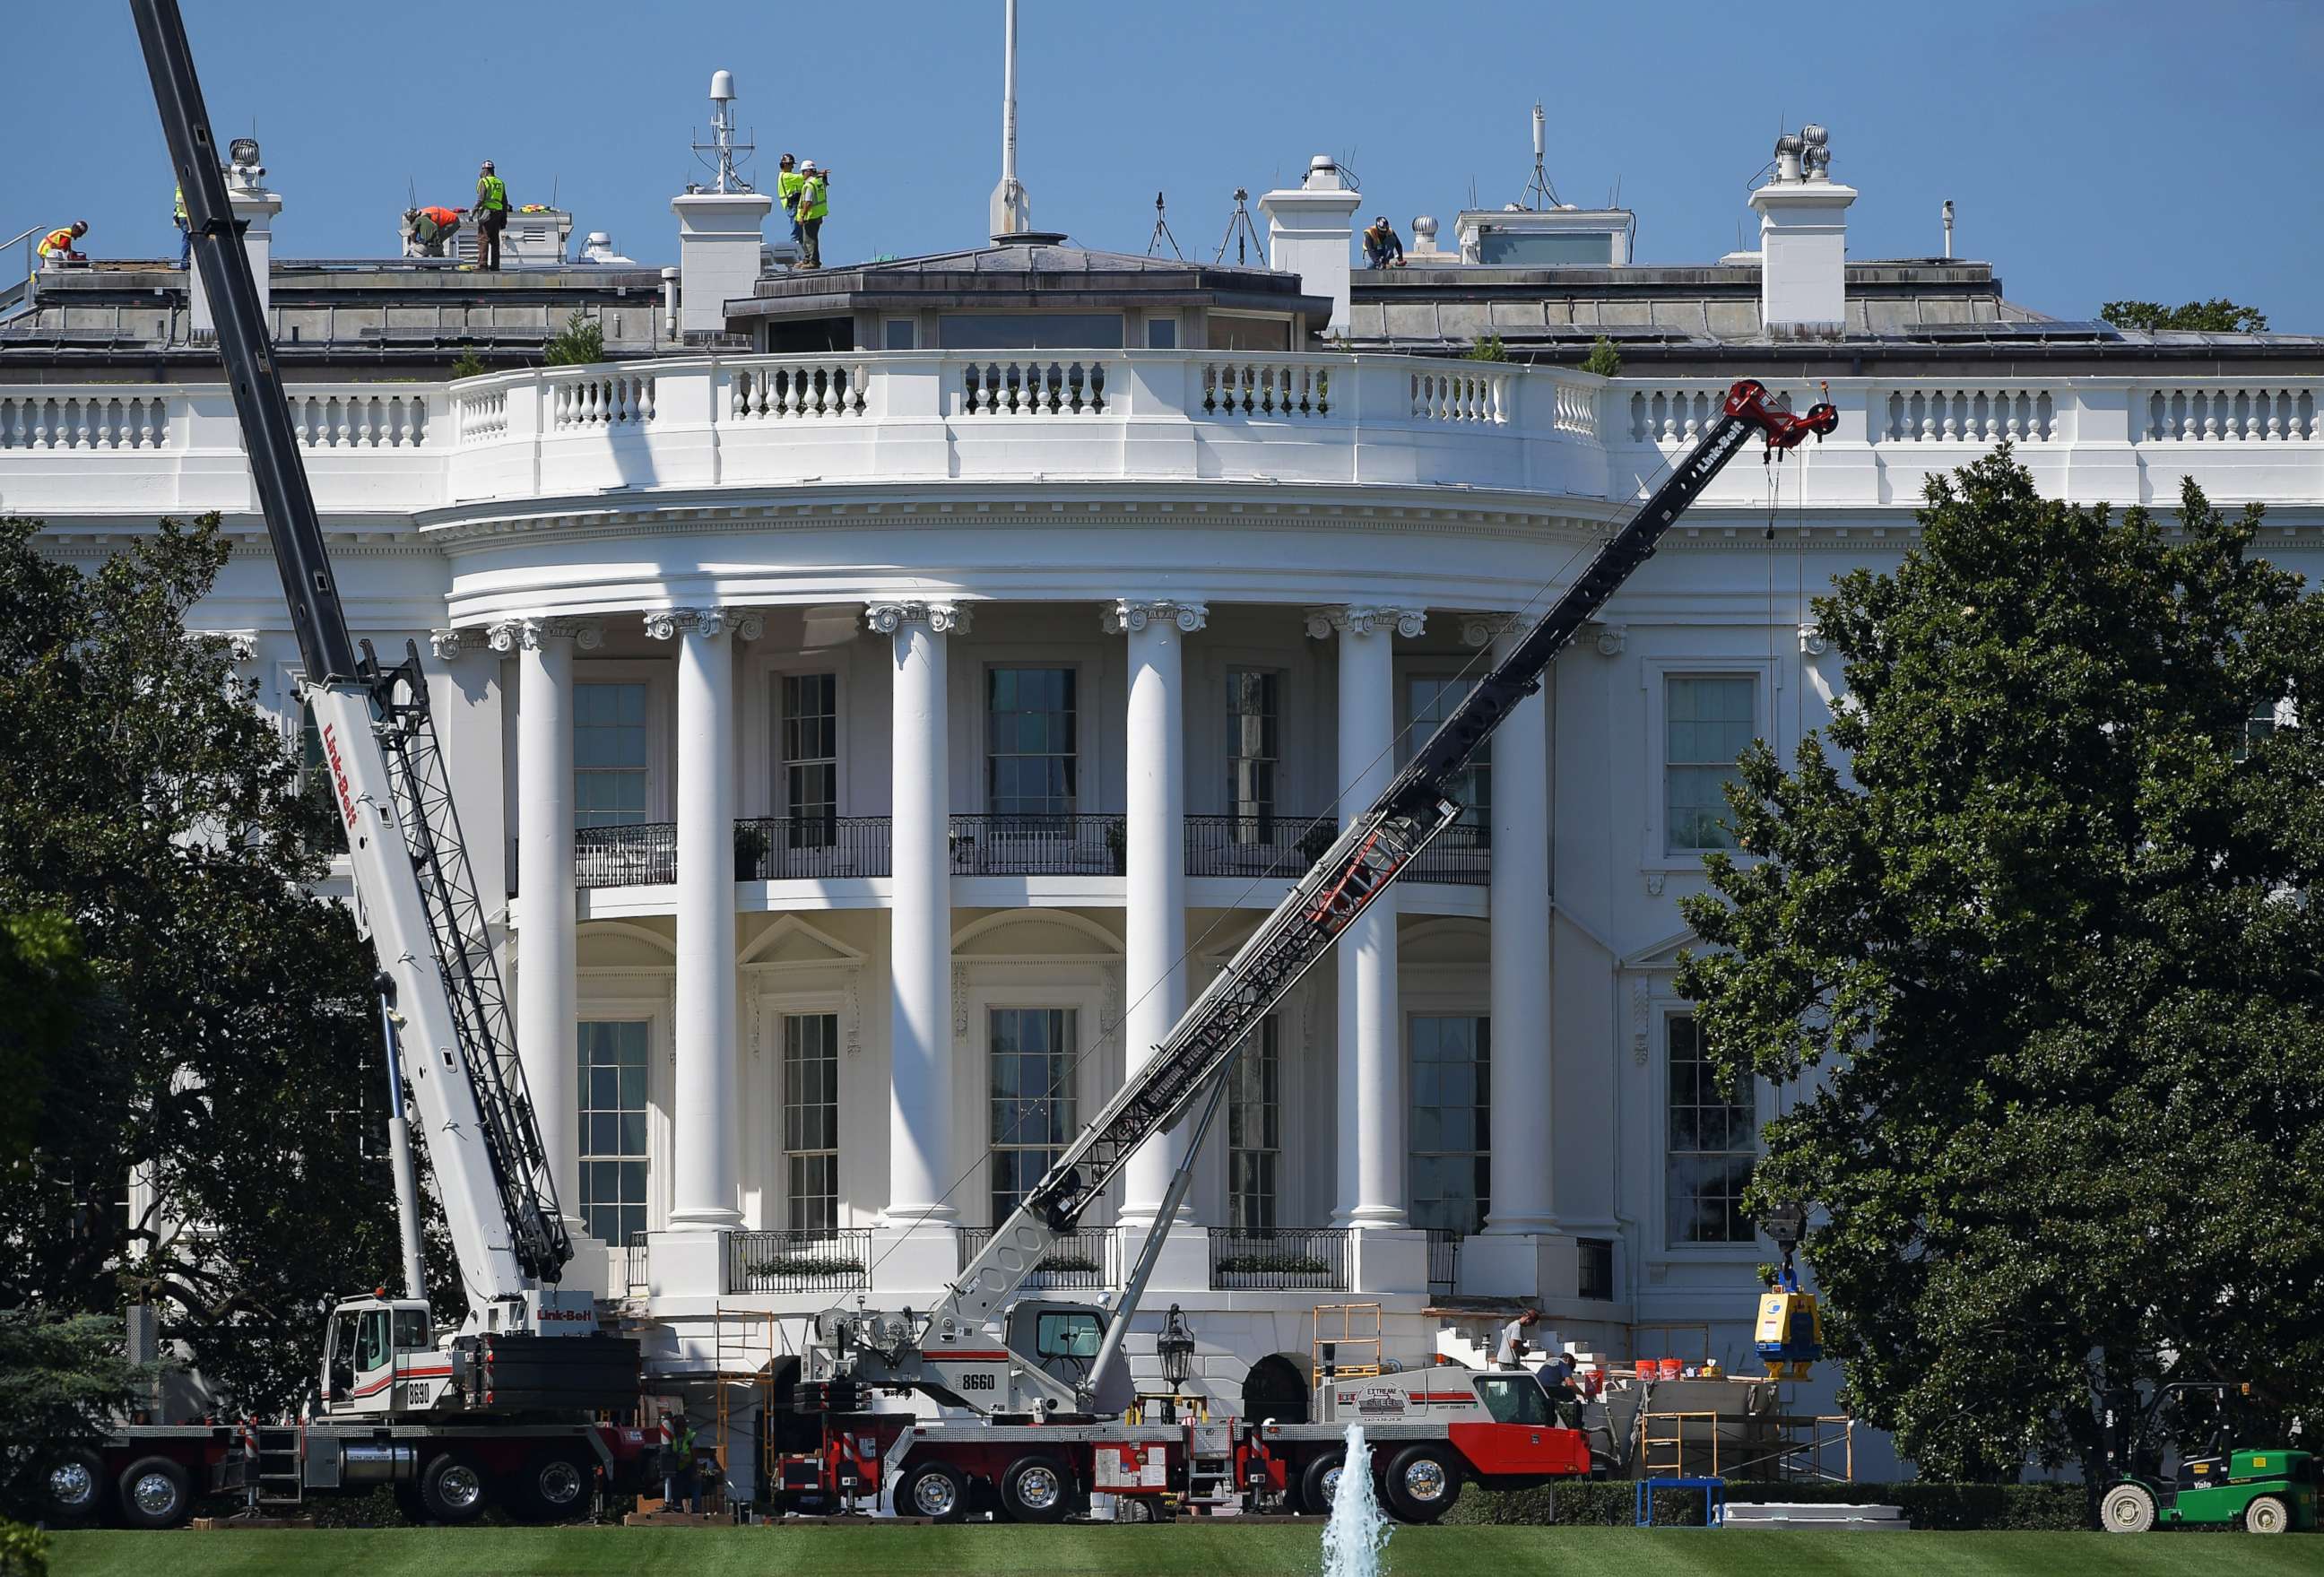 PHOTO: Cranes are seen infront of the south front of the White House as it undergoes renovations on August 9, 2017 in Washington, DC. 